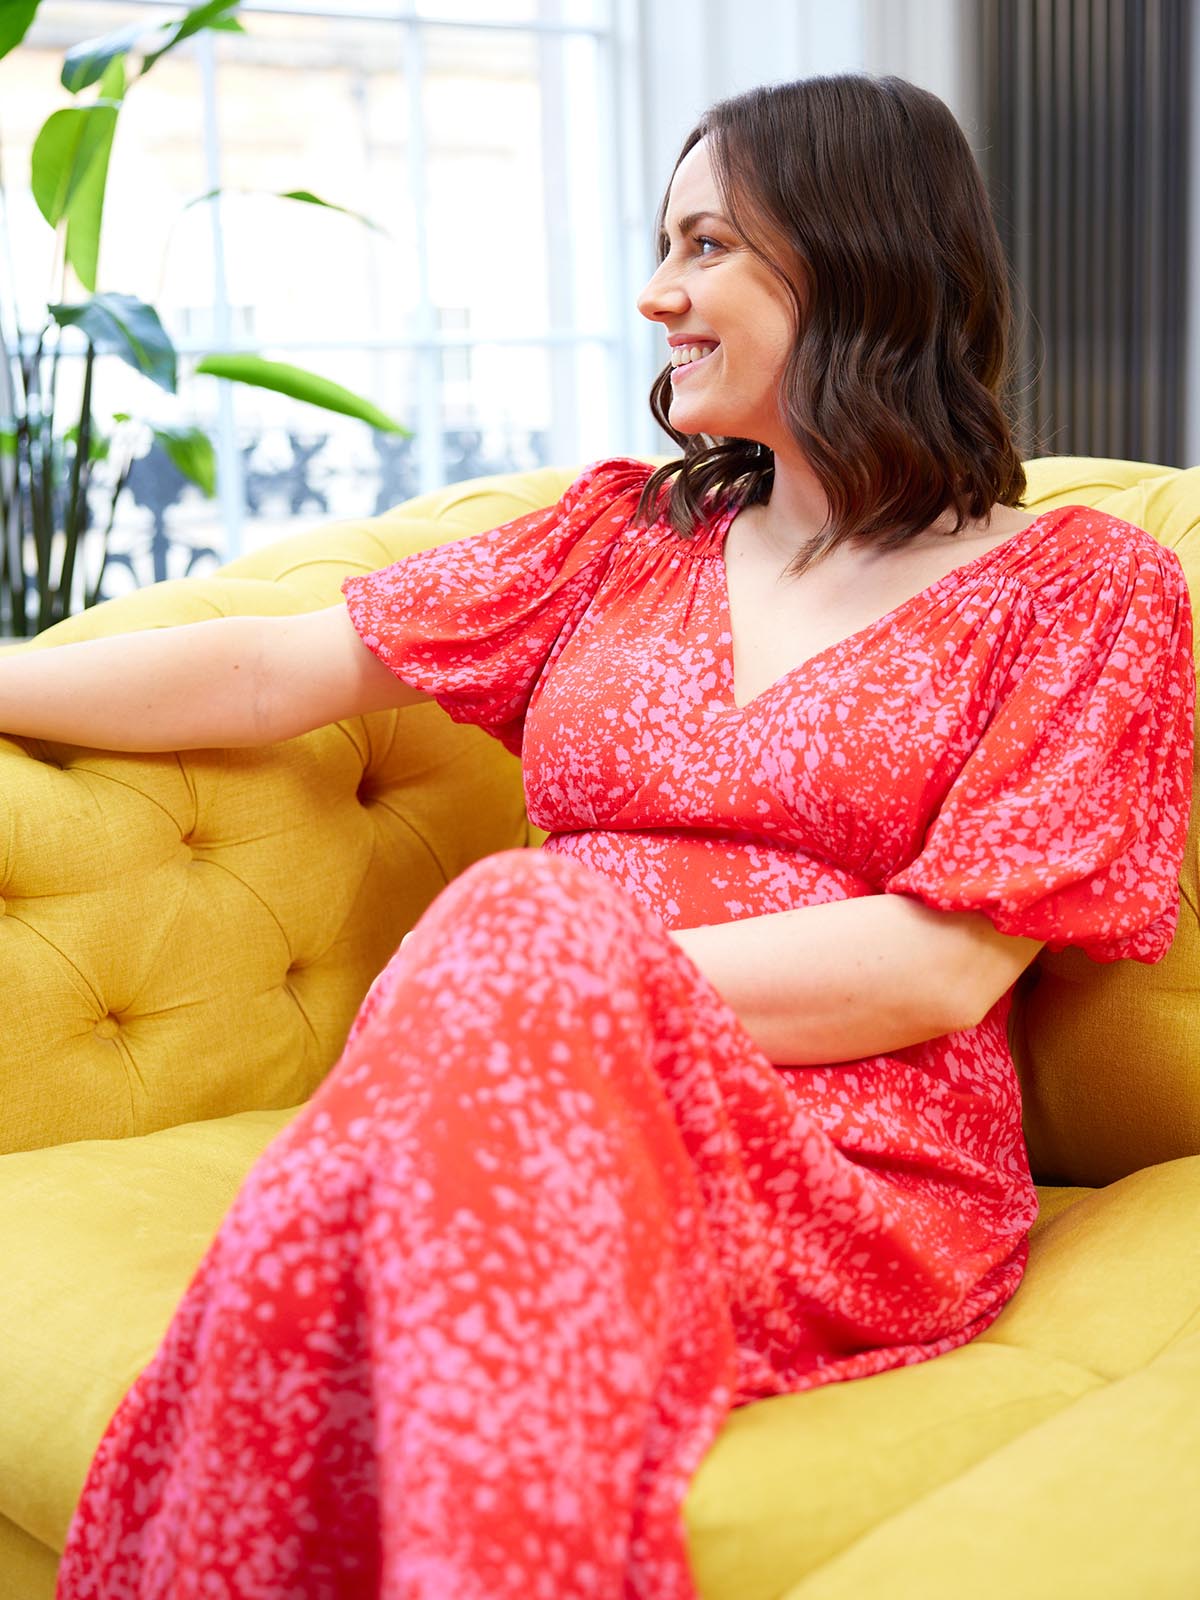 A model wears the Lauren midi dress in red and pink smudge print, pictured sitting on a bright yellow sofa in a living room.